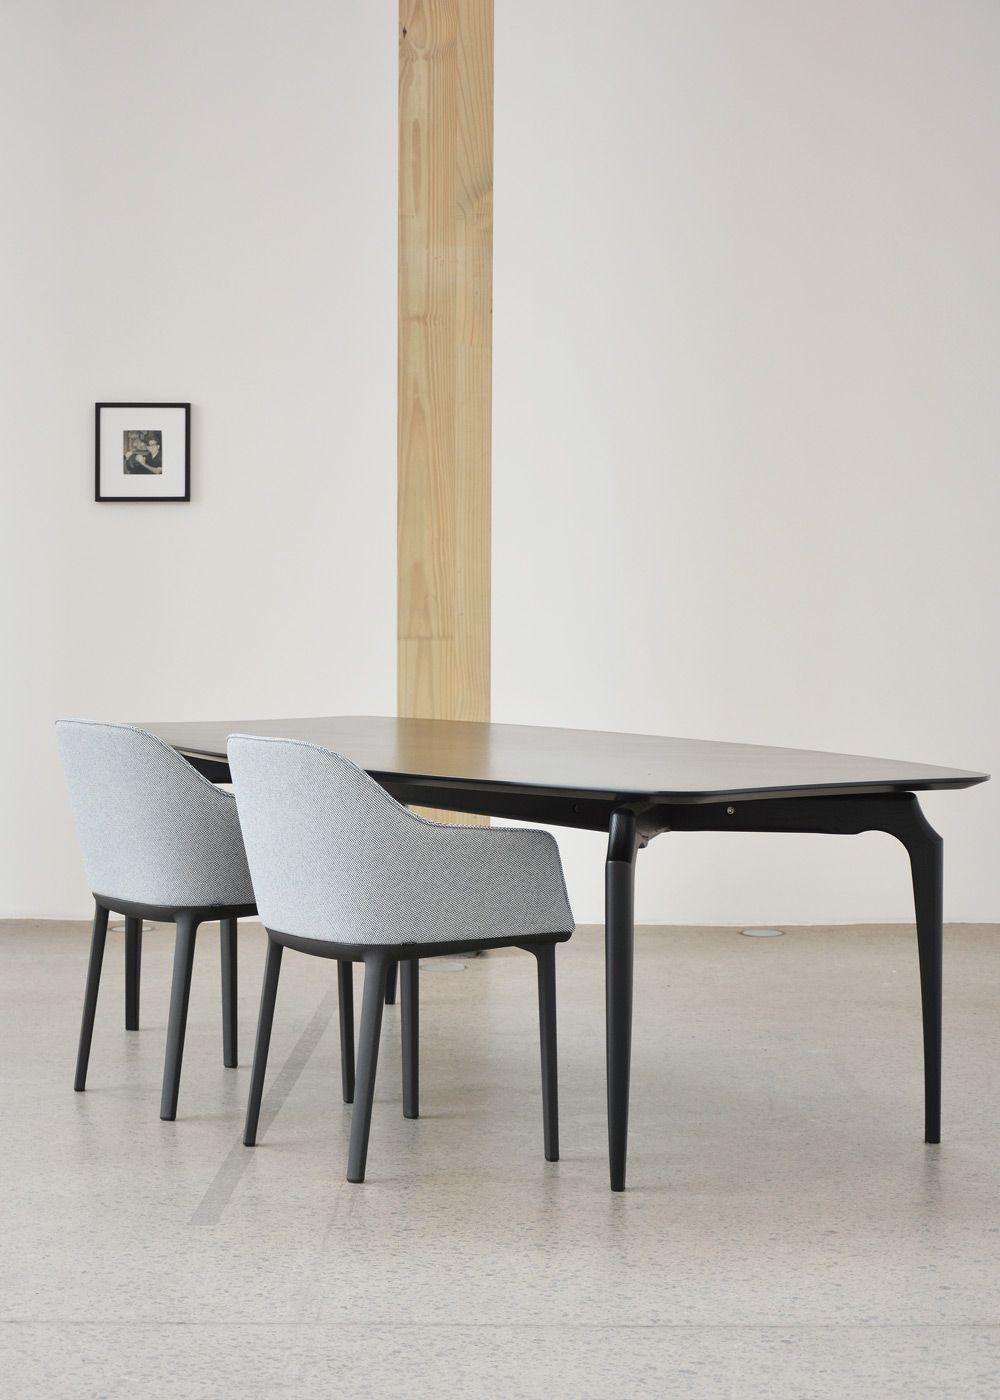 Walnut Oscar Tusquets Table 'Gaulino' Black Stained Wood by BD Barcelona For Sale